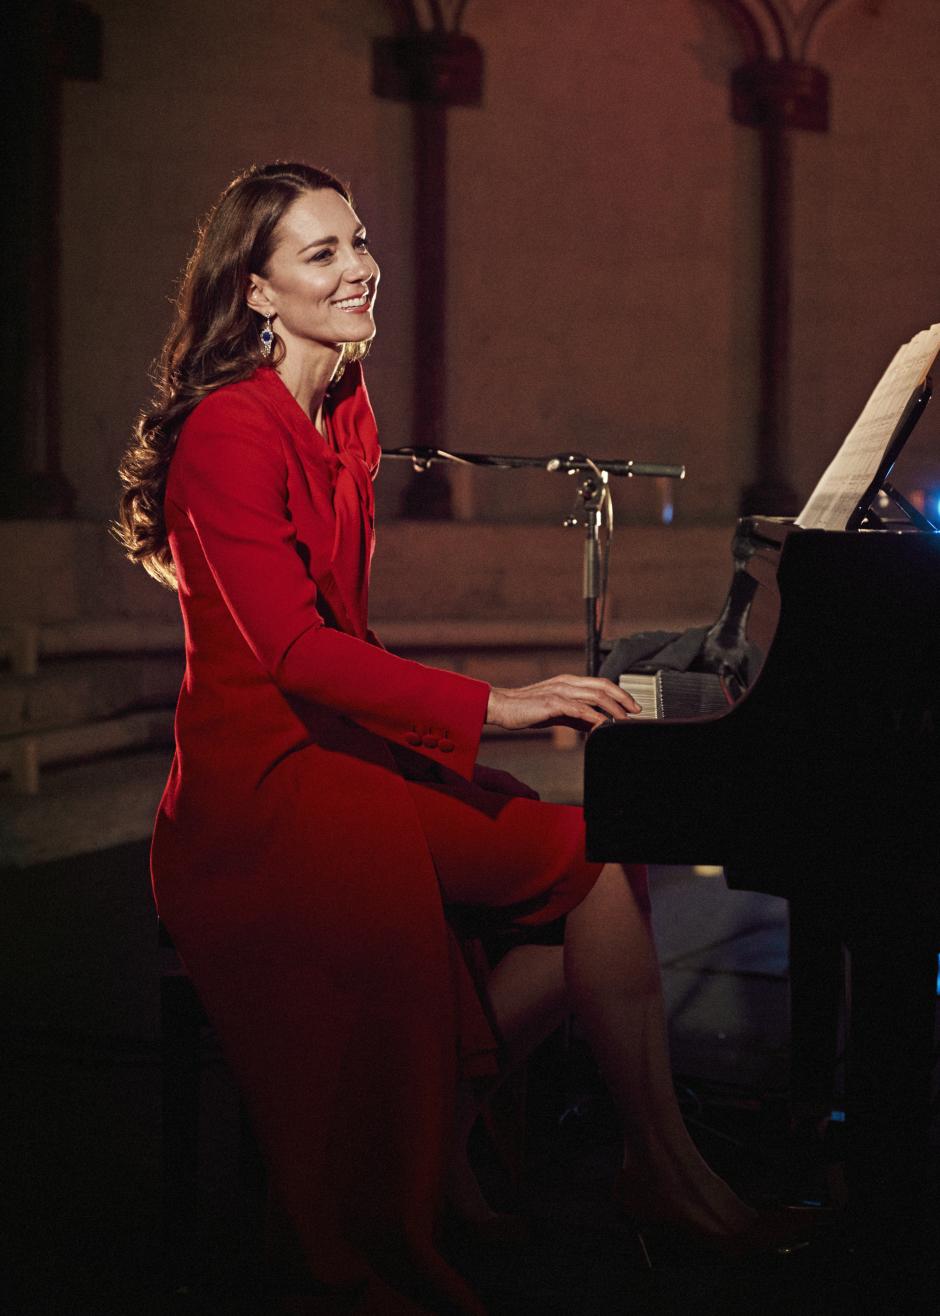 Kate Middleton plays piano in Royal Carols: Together At Christmas, which was broadcast by ITV on Christmas Eve 2021.